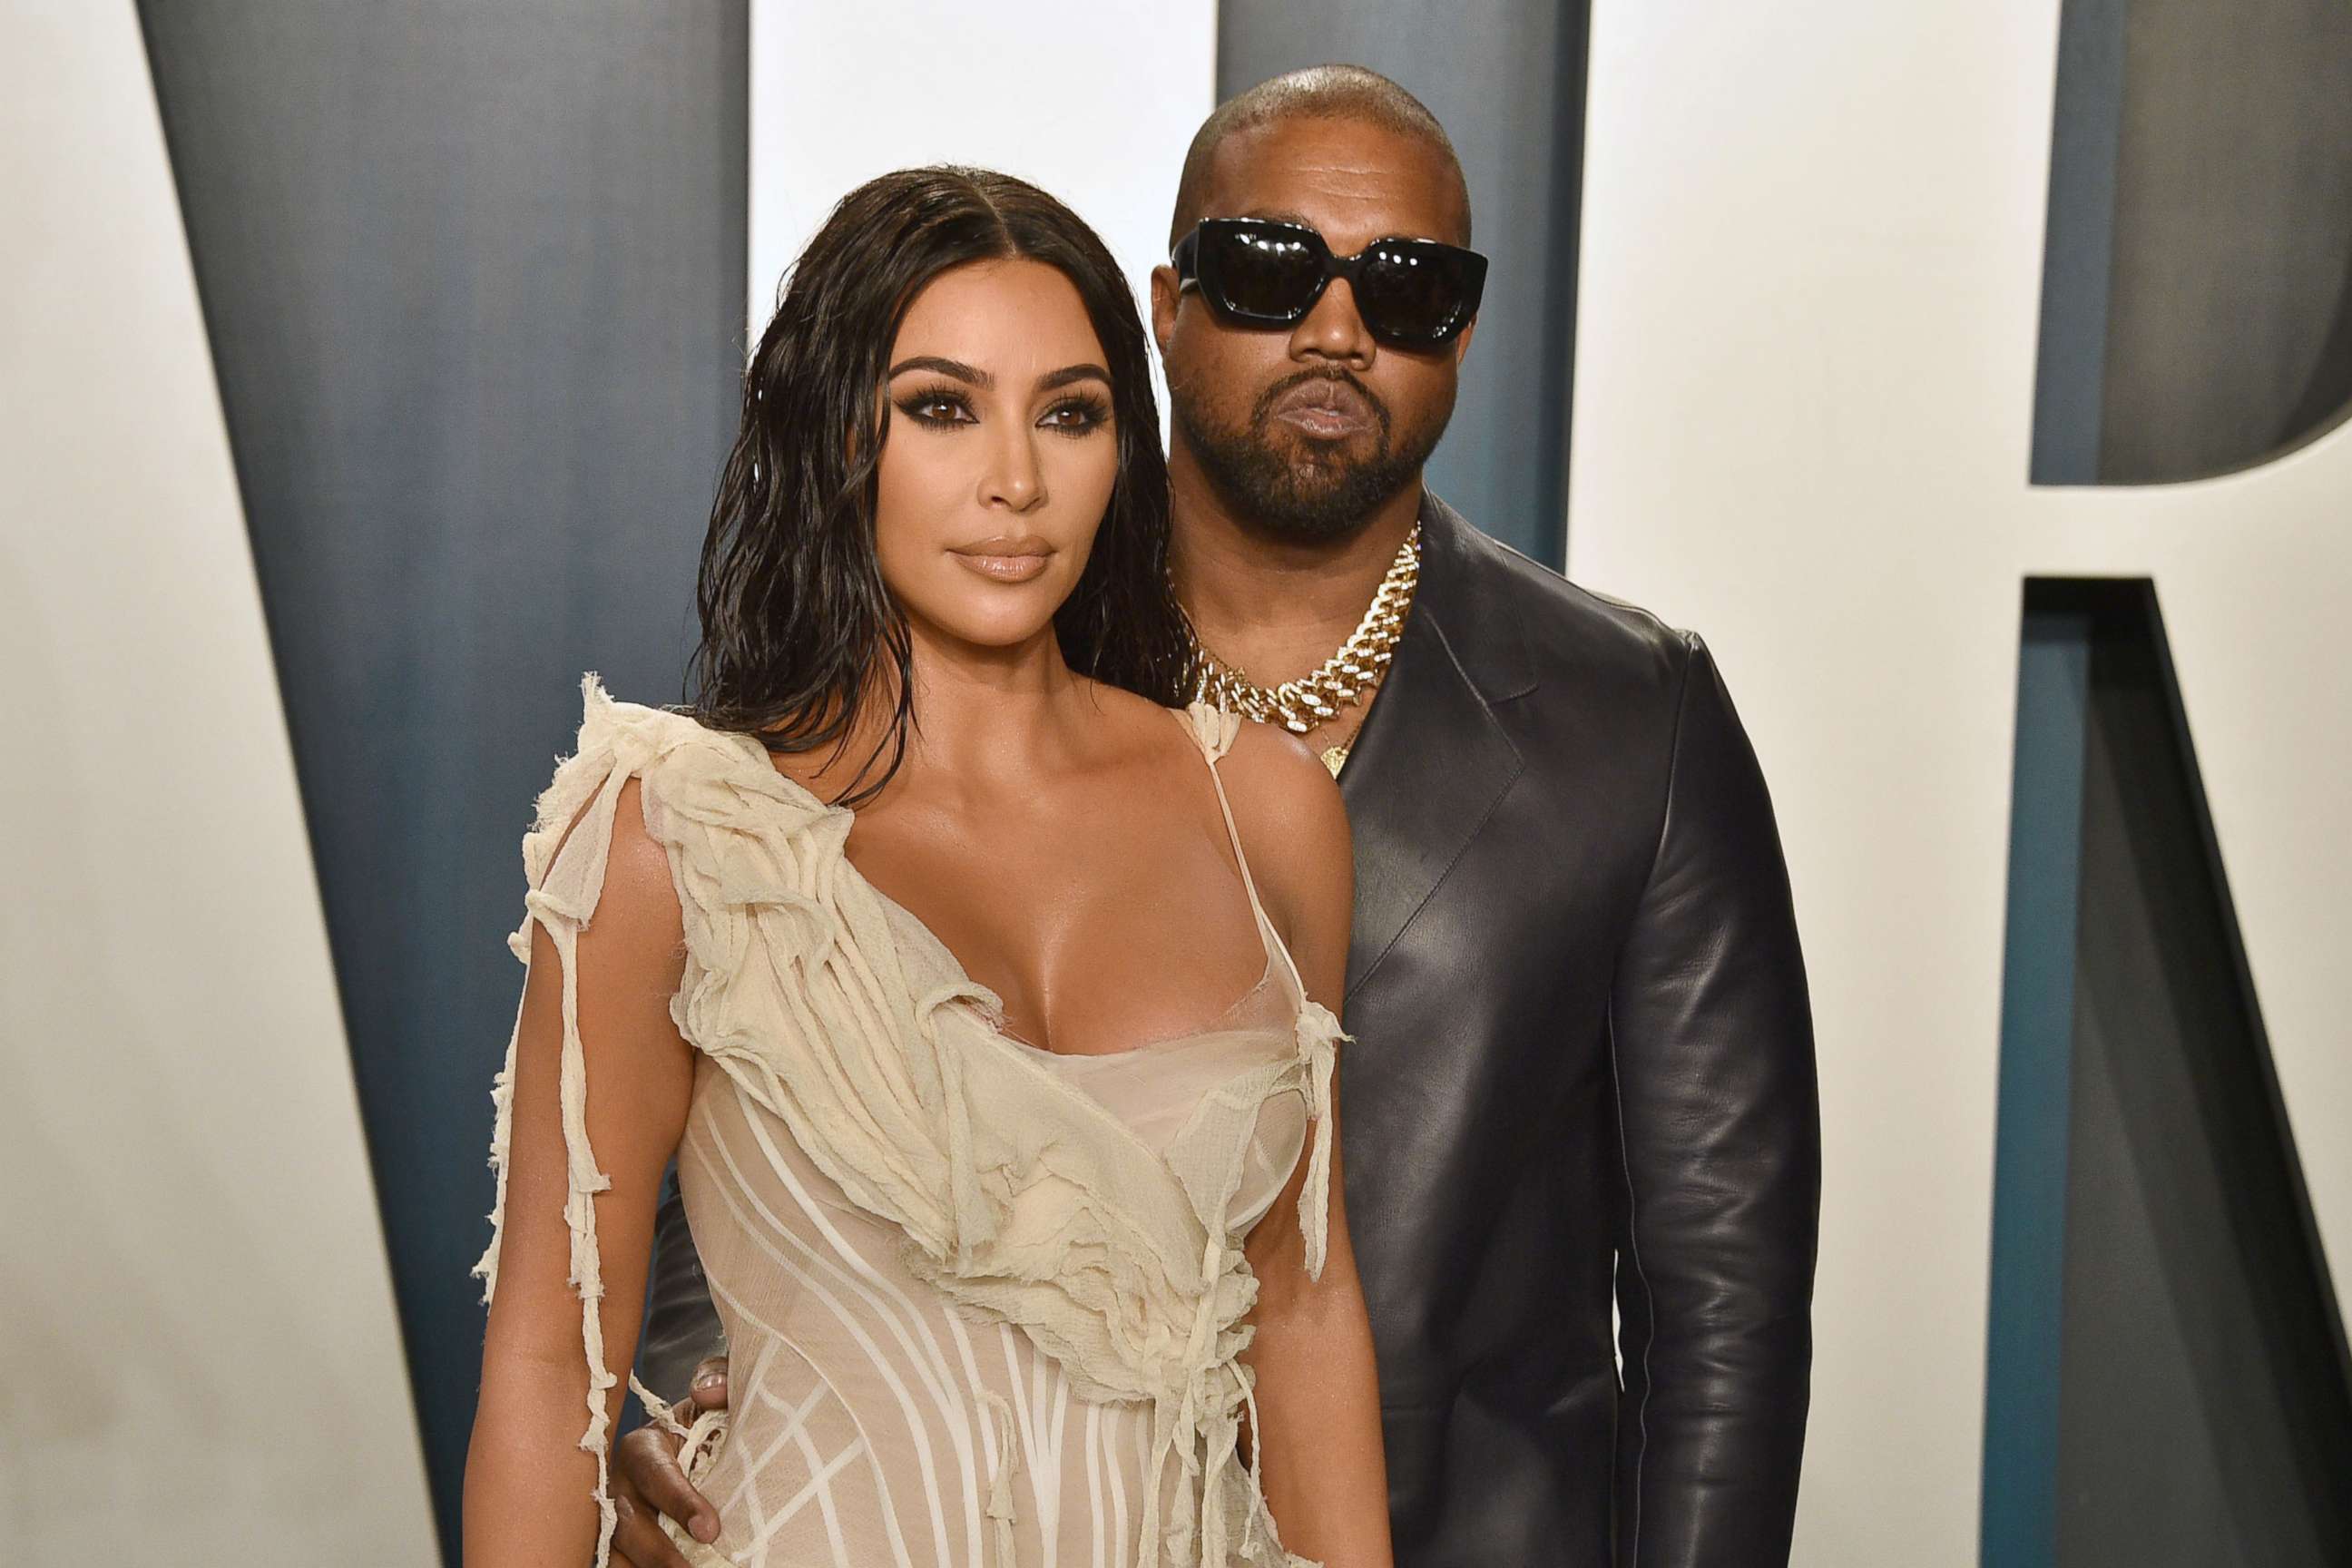 PHOTO: In this Feb. 9, 2020 file photo Kim Kardashian and Kanye West attend the 2020 Vanity Fair Oscar Party at Wallis Annenberg Center for the Performing Arts in Beverly Hills, Calif.